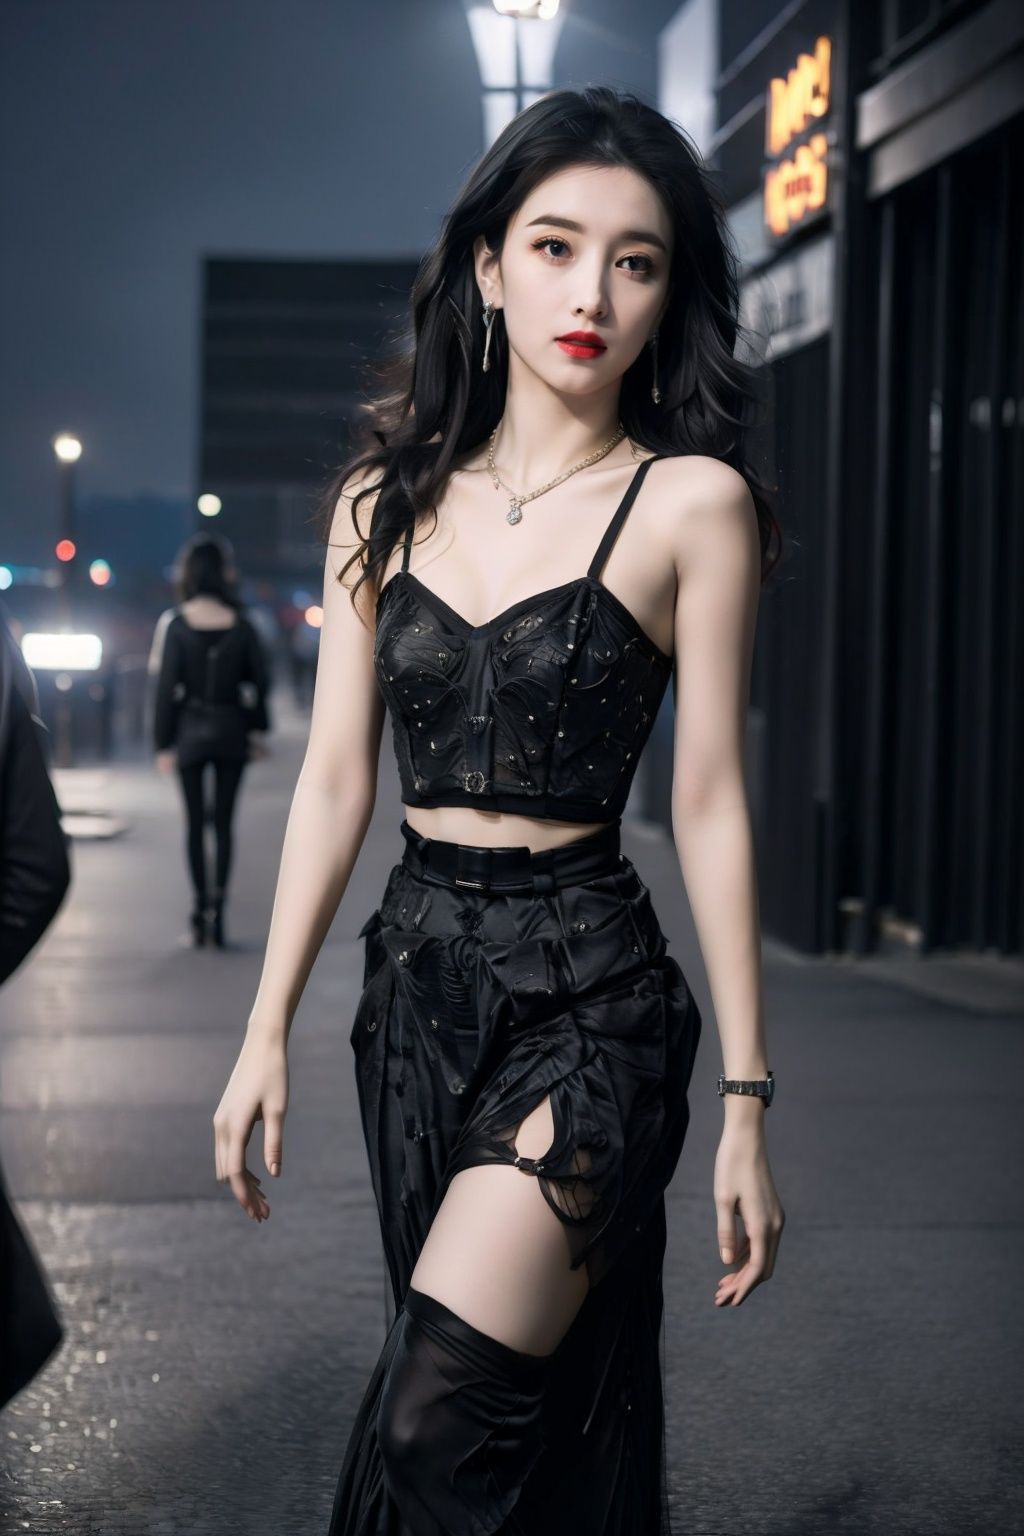  1 girl, young woman, black dress, (short:1.2), sexy, alluring, seductive, beautiful eyes, light makeup, black hair, long hair, (curly hair:1.1), earrings, necklace, bracelet, high heels, thigh-highs, legs, walking, outdoor, city, night, streetlights, neon signs, buildings, (cityscape:1.2), urban, modern, fashionable, confident, (sophisticated:1.1), mysterious, allure, attractive, (glamorous:1.0), posh, stylish, elegant, (classy:1.1), portrait, close-up, shallow depth of field, (cinematic composition:1.3), urban life, city girl, nightlife, vibrant, energetic, dynamic, (hdr:1.0), accent lighting, (pantyshot:1.0), fish eye lens.heigirl